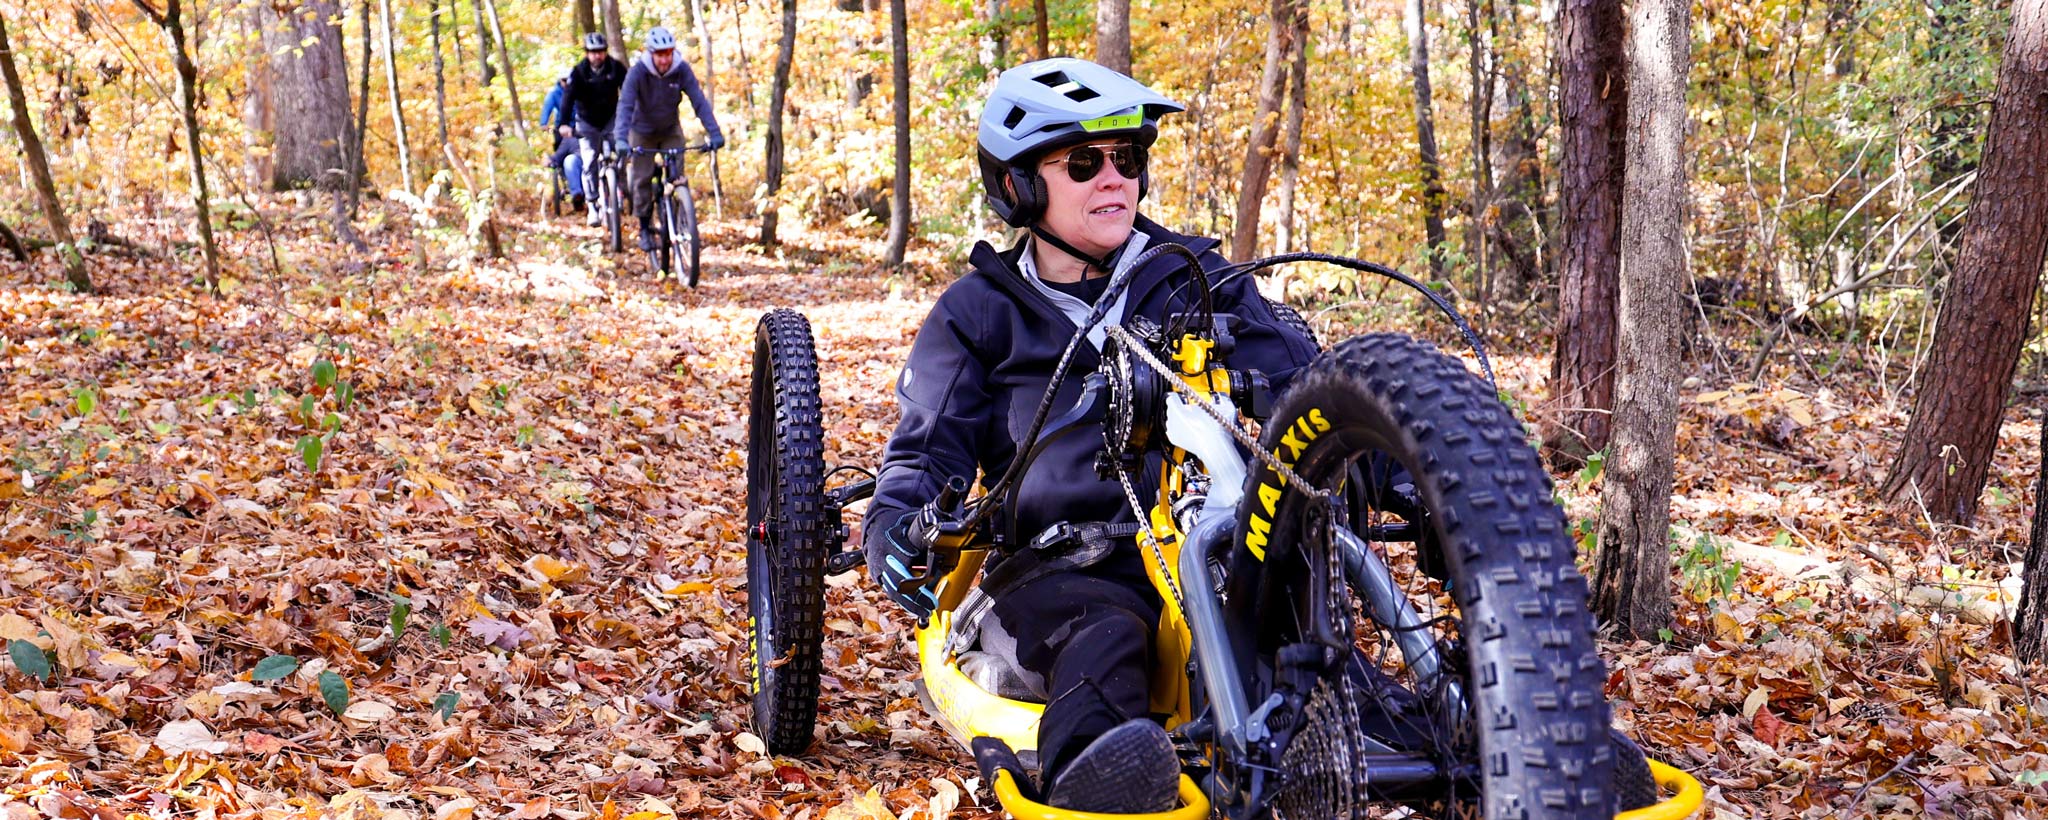 Knox County ADA coordinator and Catalyst board member Carly Pearson rides an adaptive bike at Trotter Bluff Trail in east Tennessee